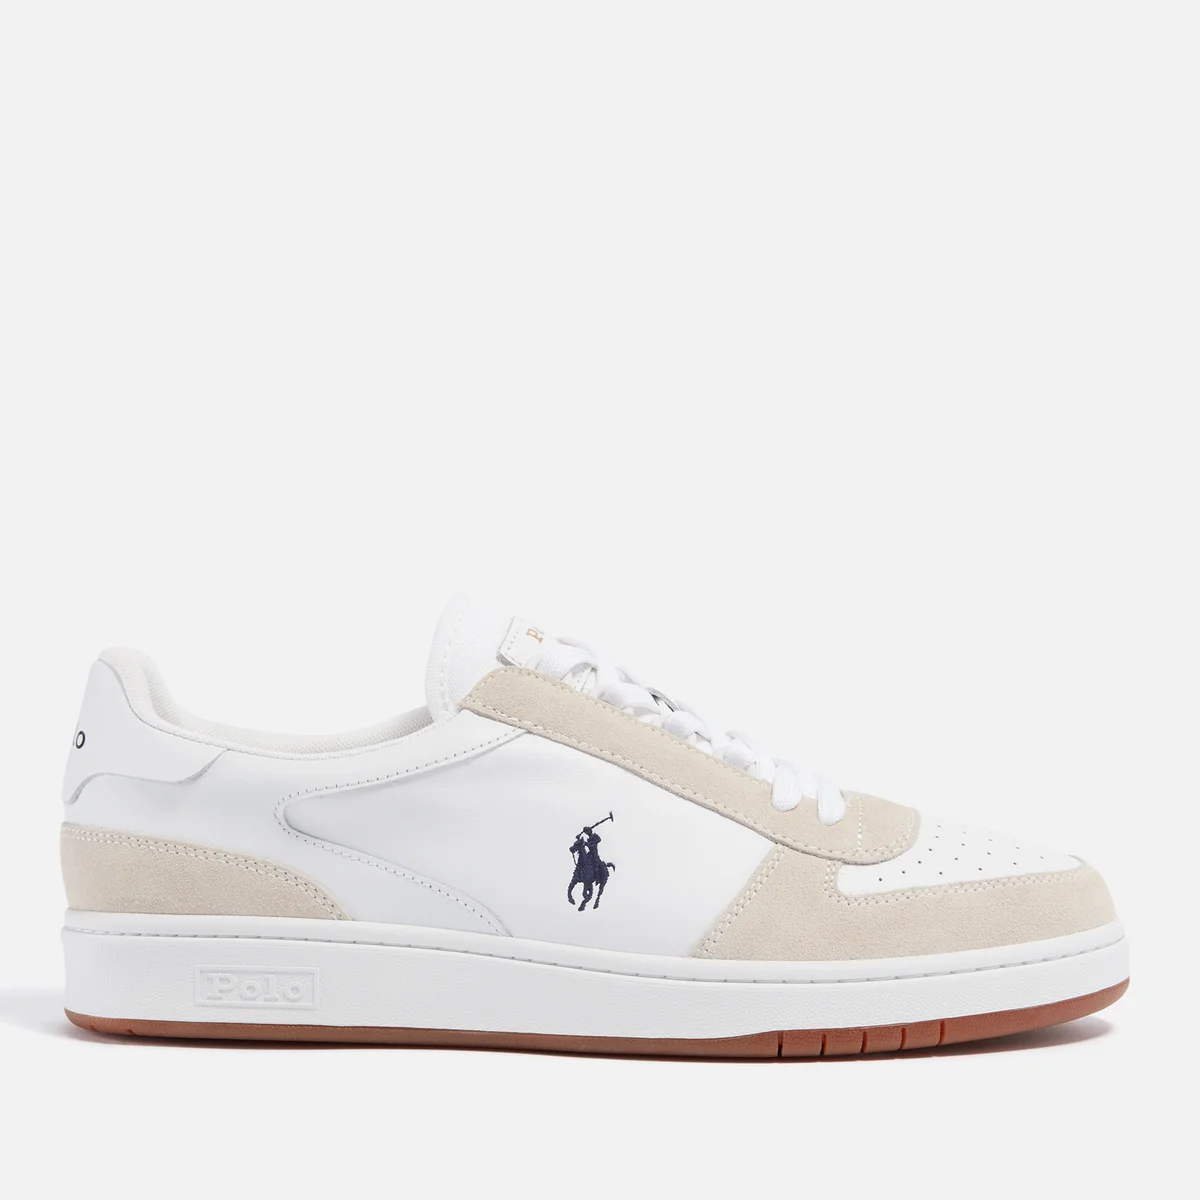 Polo Ralph Lauren Men's Polo Court Leather/Suede Trainers - White/Newport Navy PP Image 1